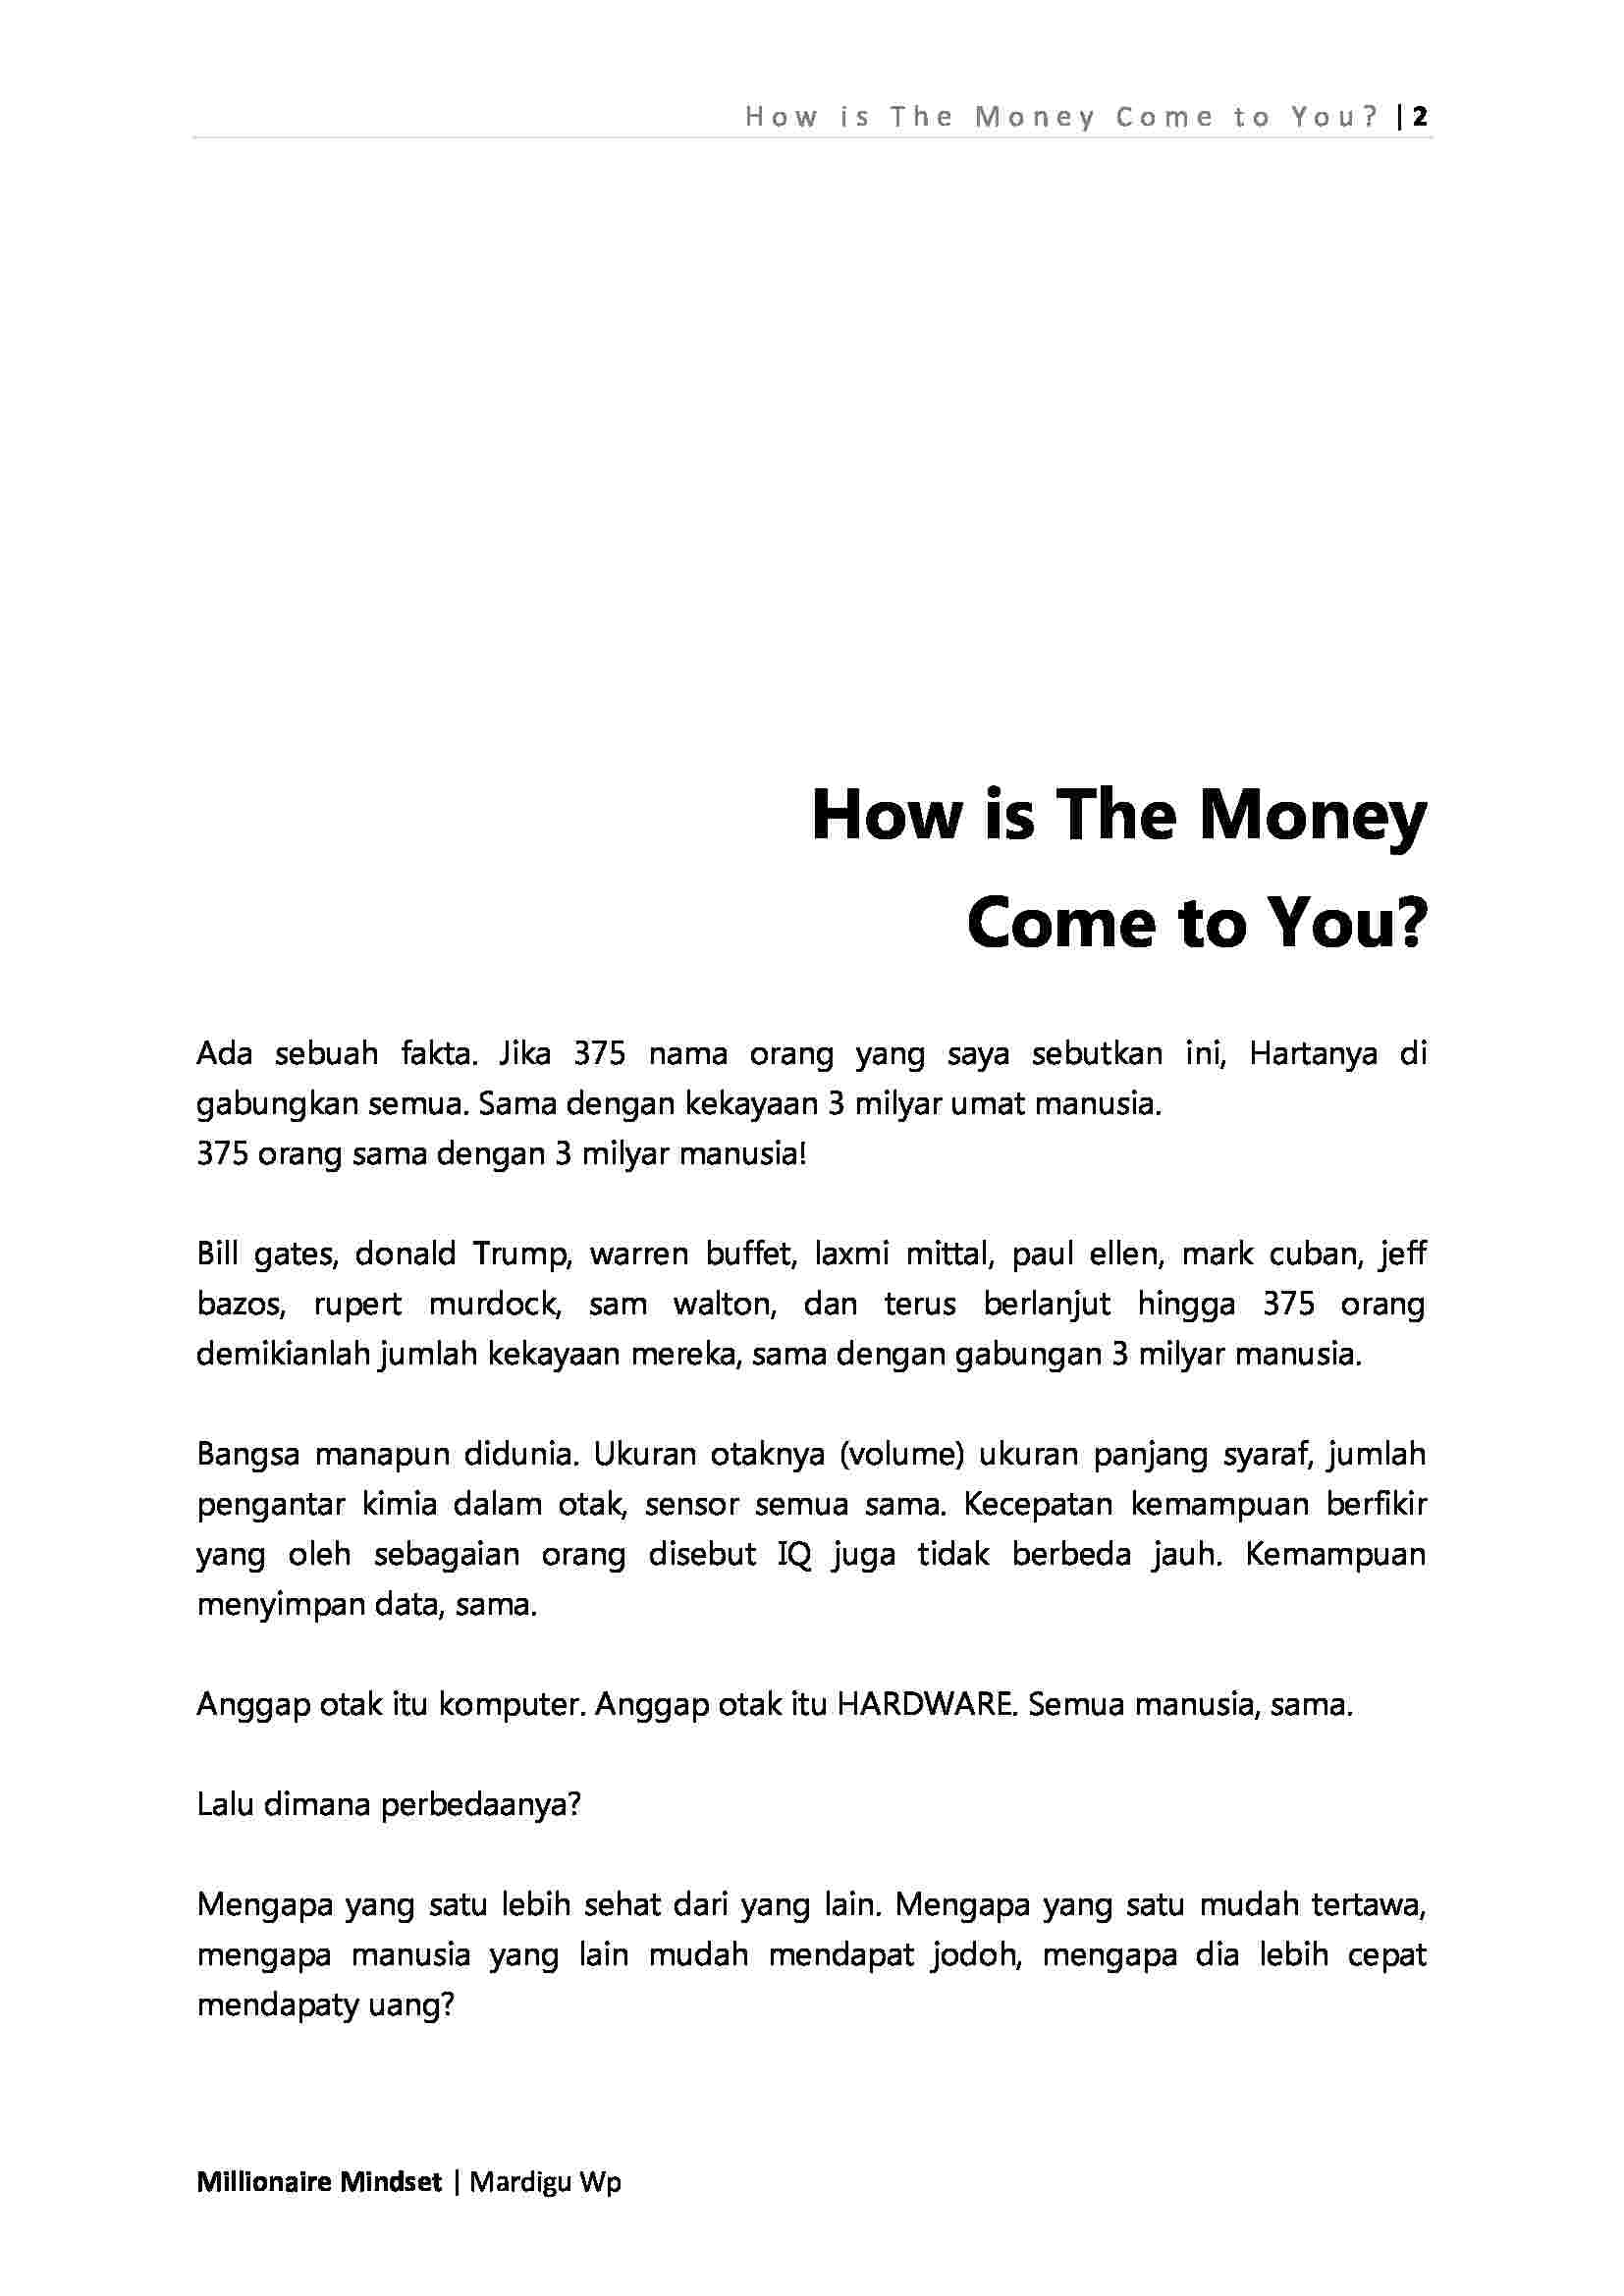 how-is-the-money-come-to-you-by-mardigu-wp